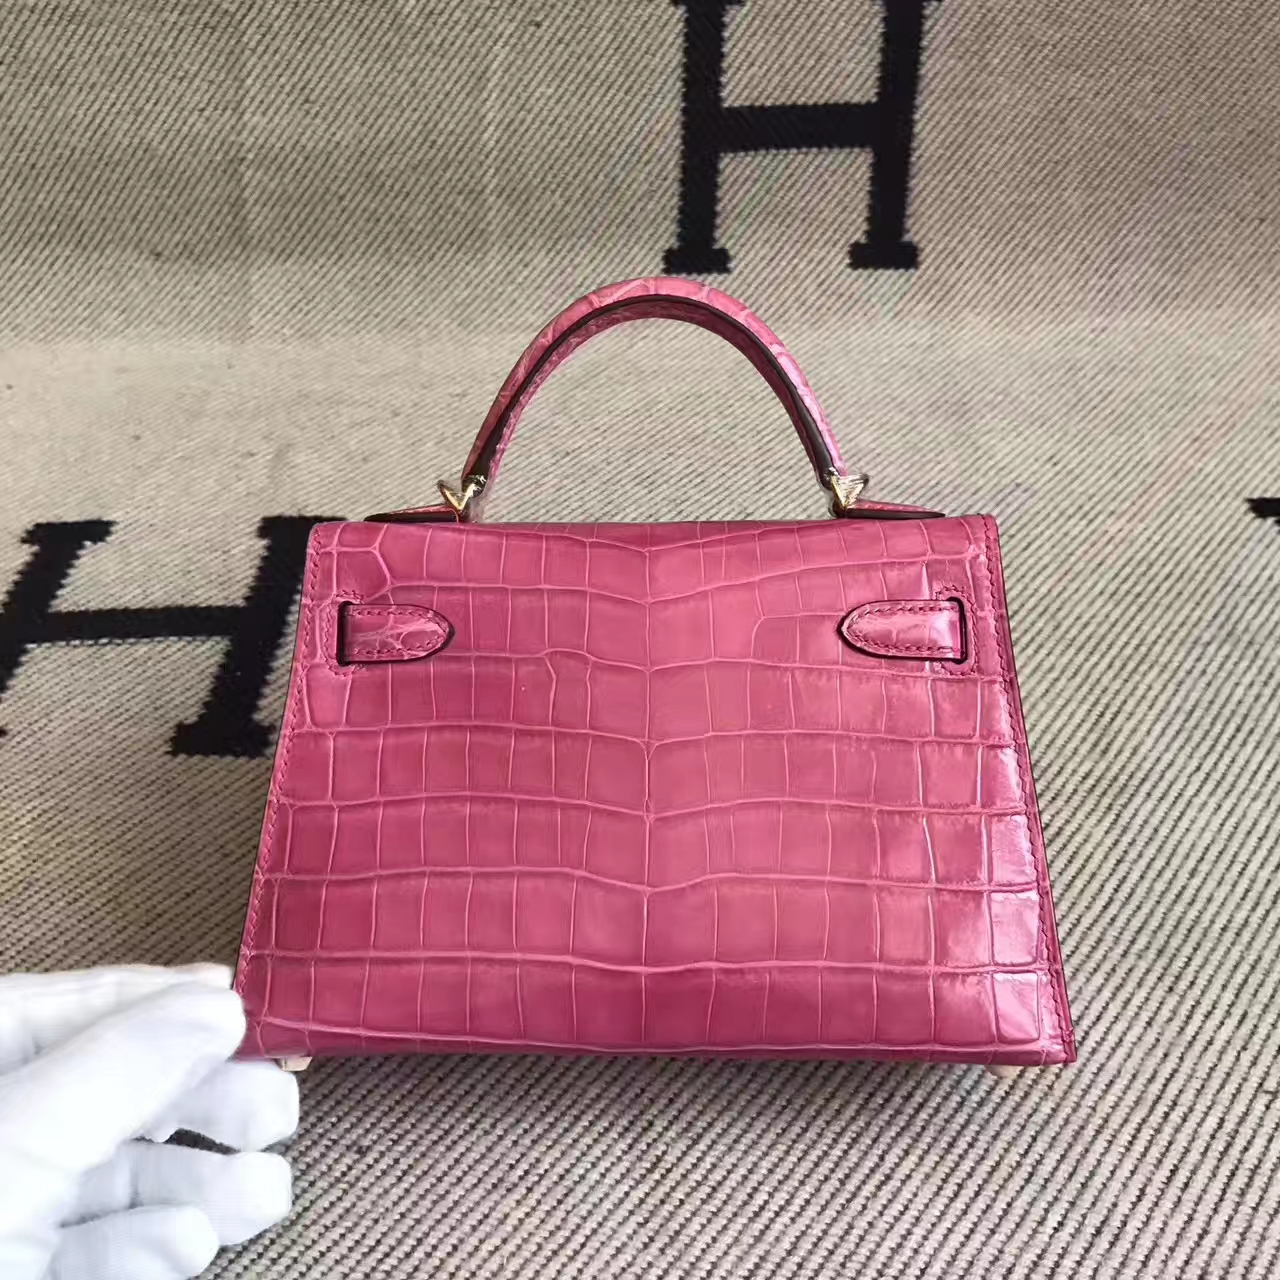 Cheap Hermes Minikelly-2 Clutch Bag in 5E Hot Pink Crocodile Shiny Leather